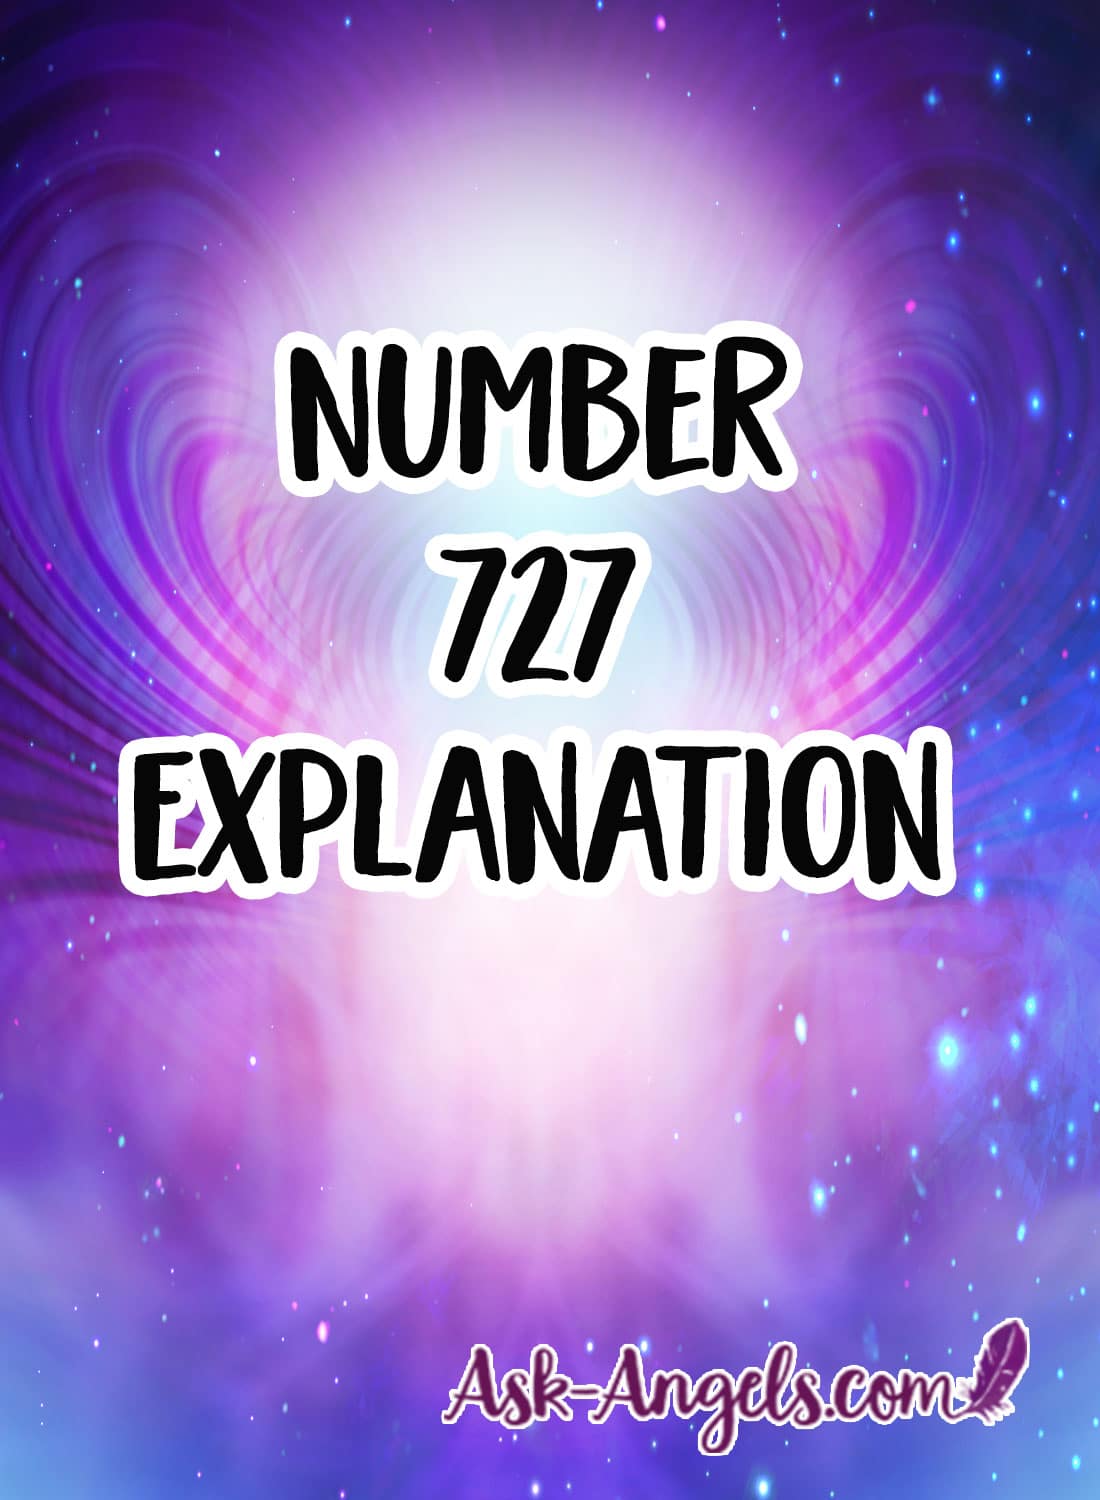 number 727 explanation